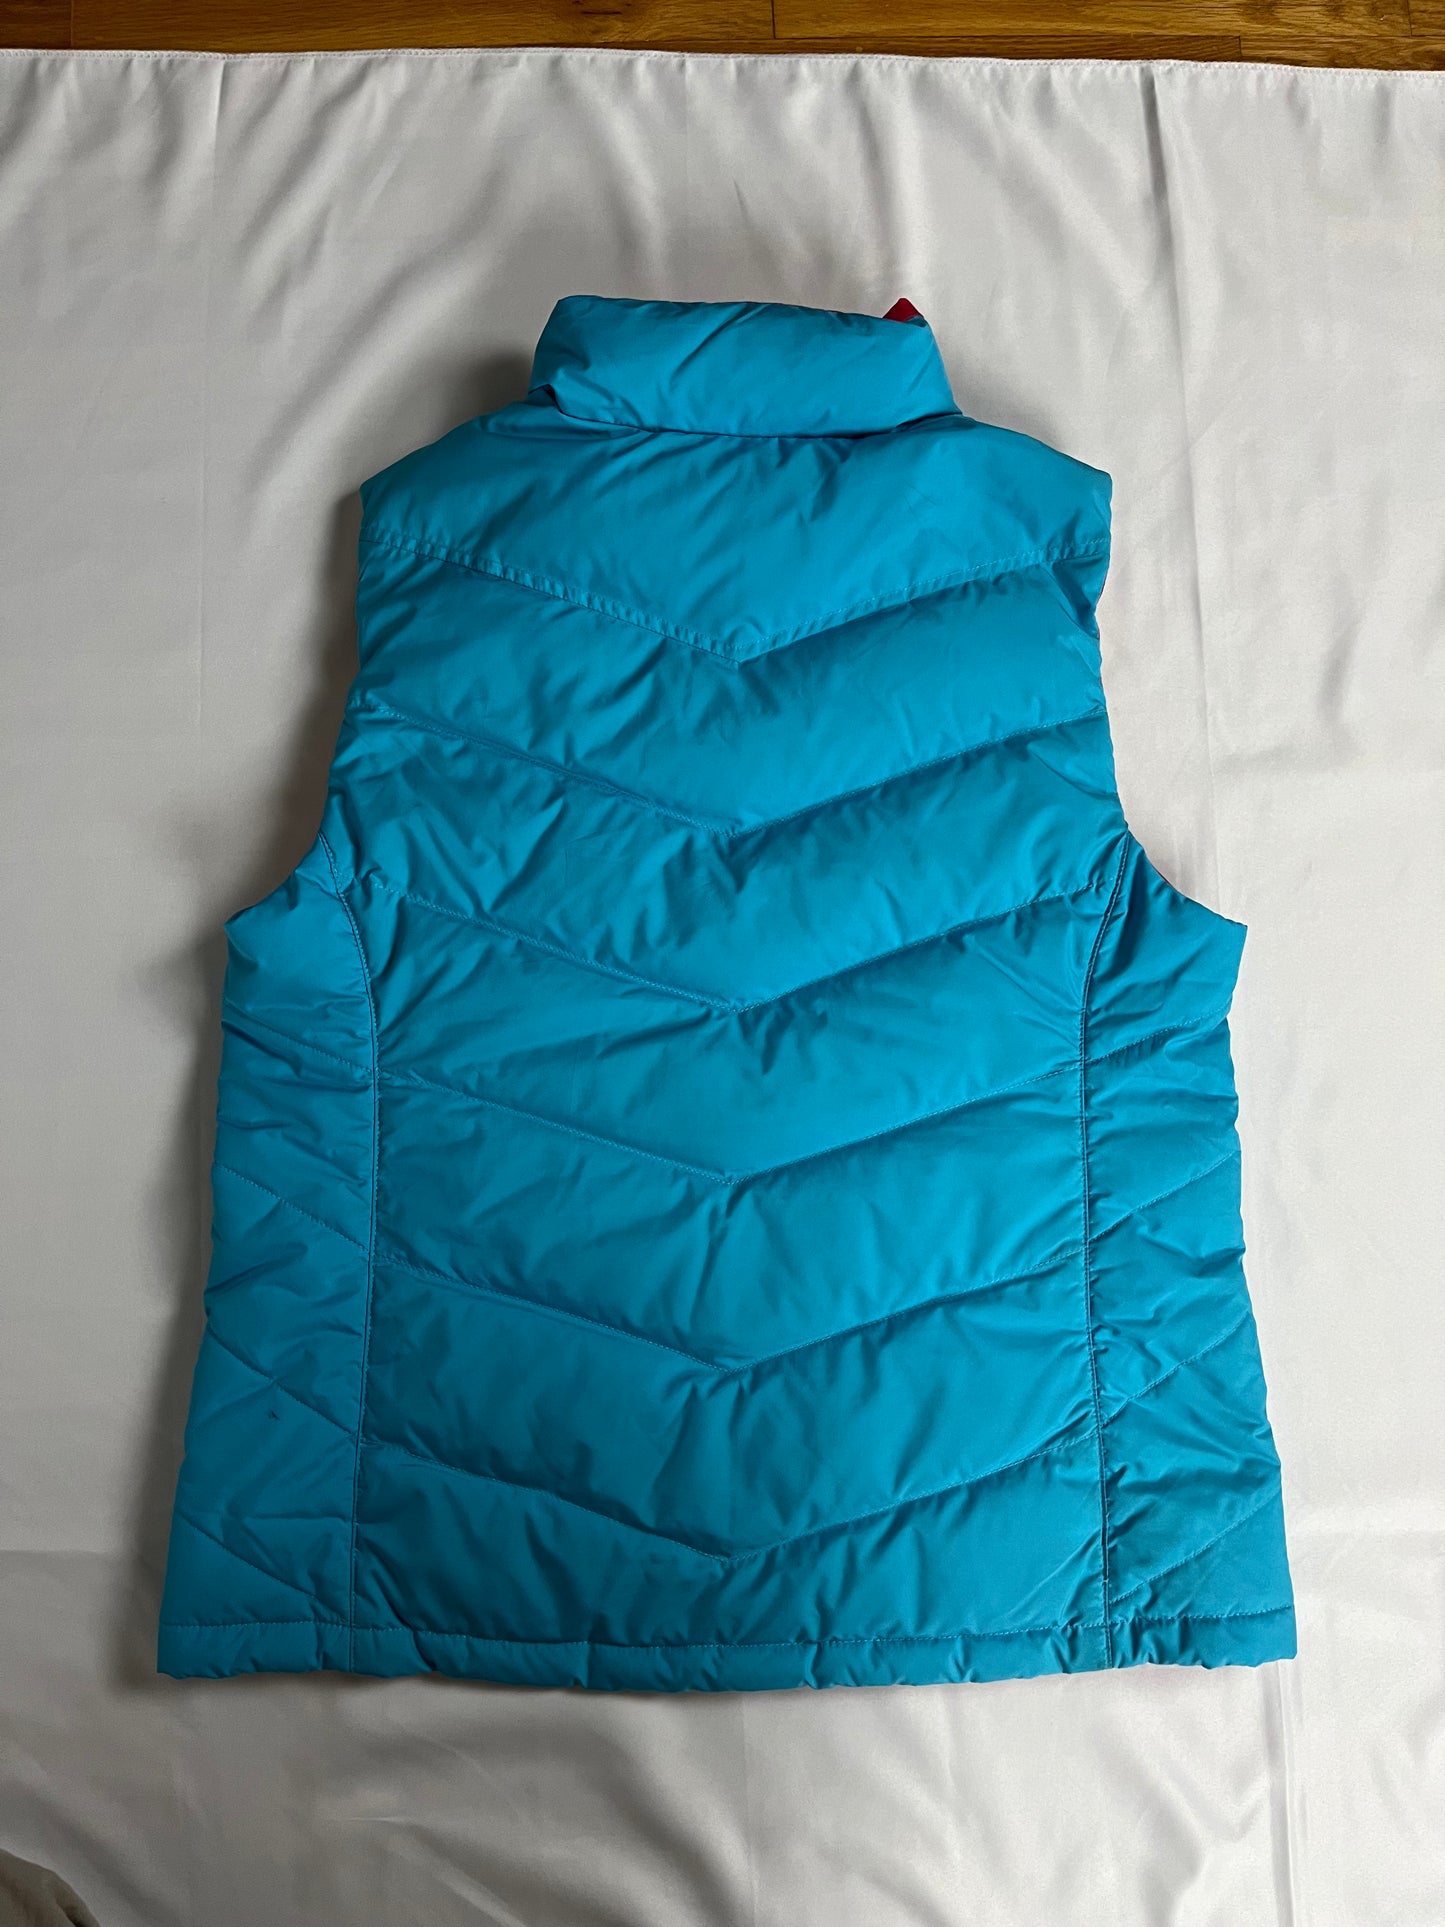 North Face Teal Puffer 550 Vest